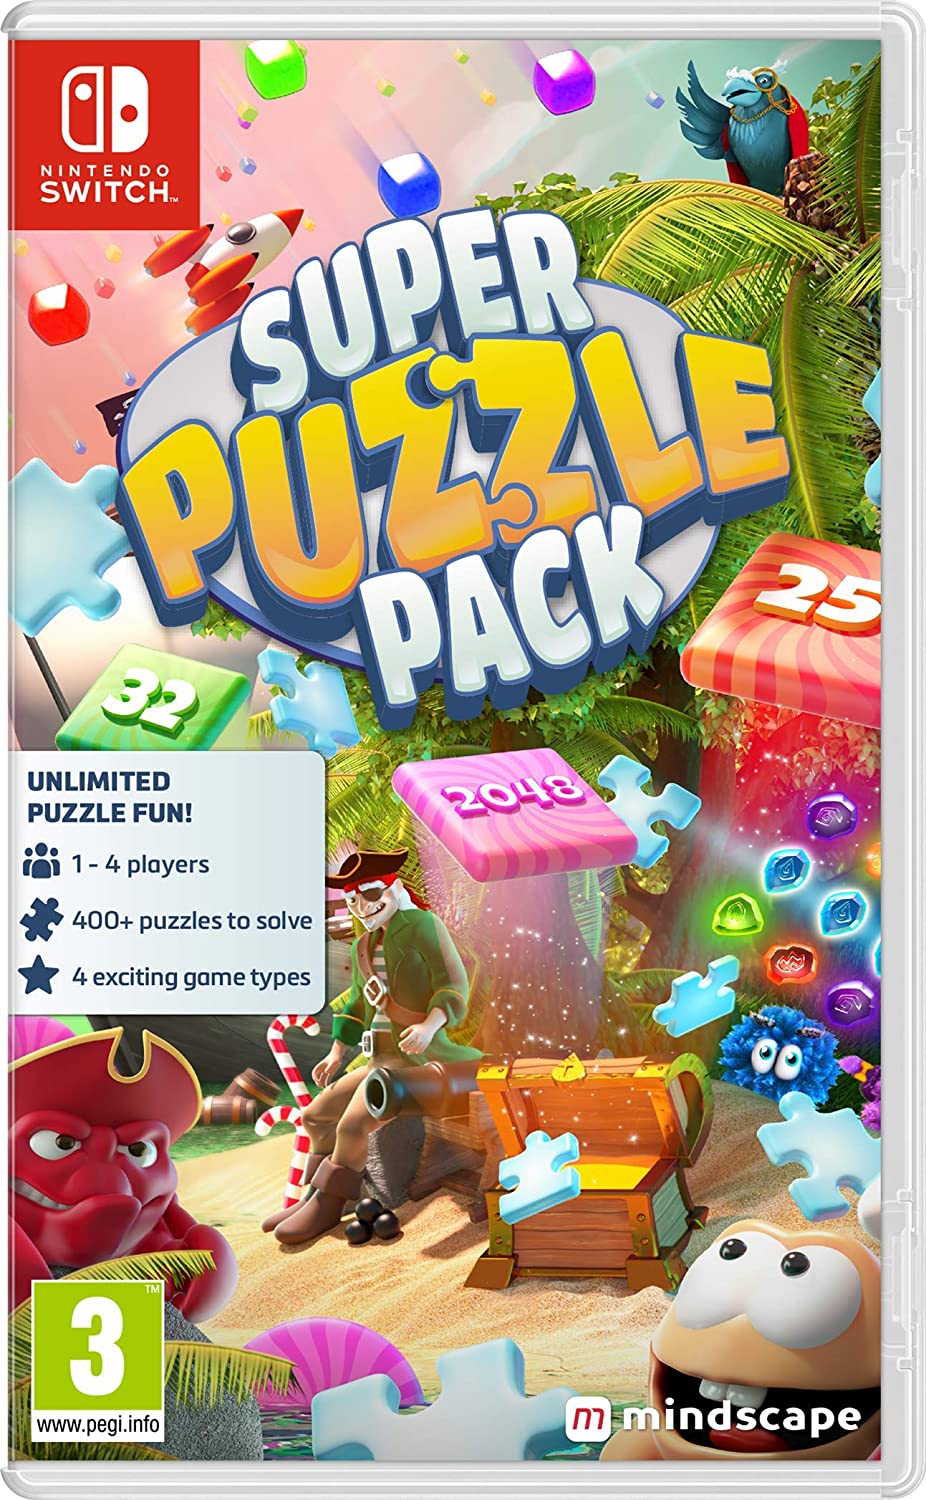 Switch Super Puzzle Pack 